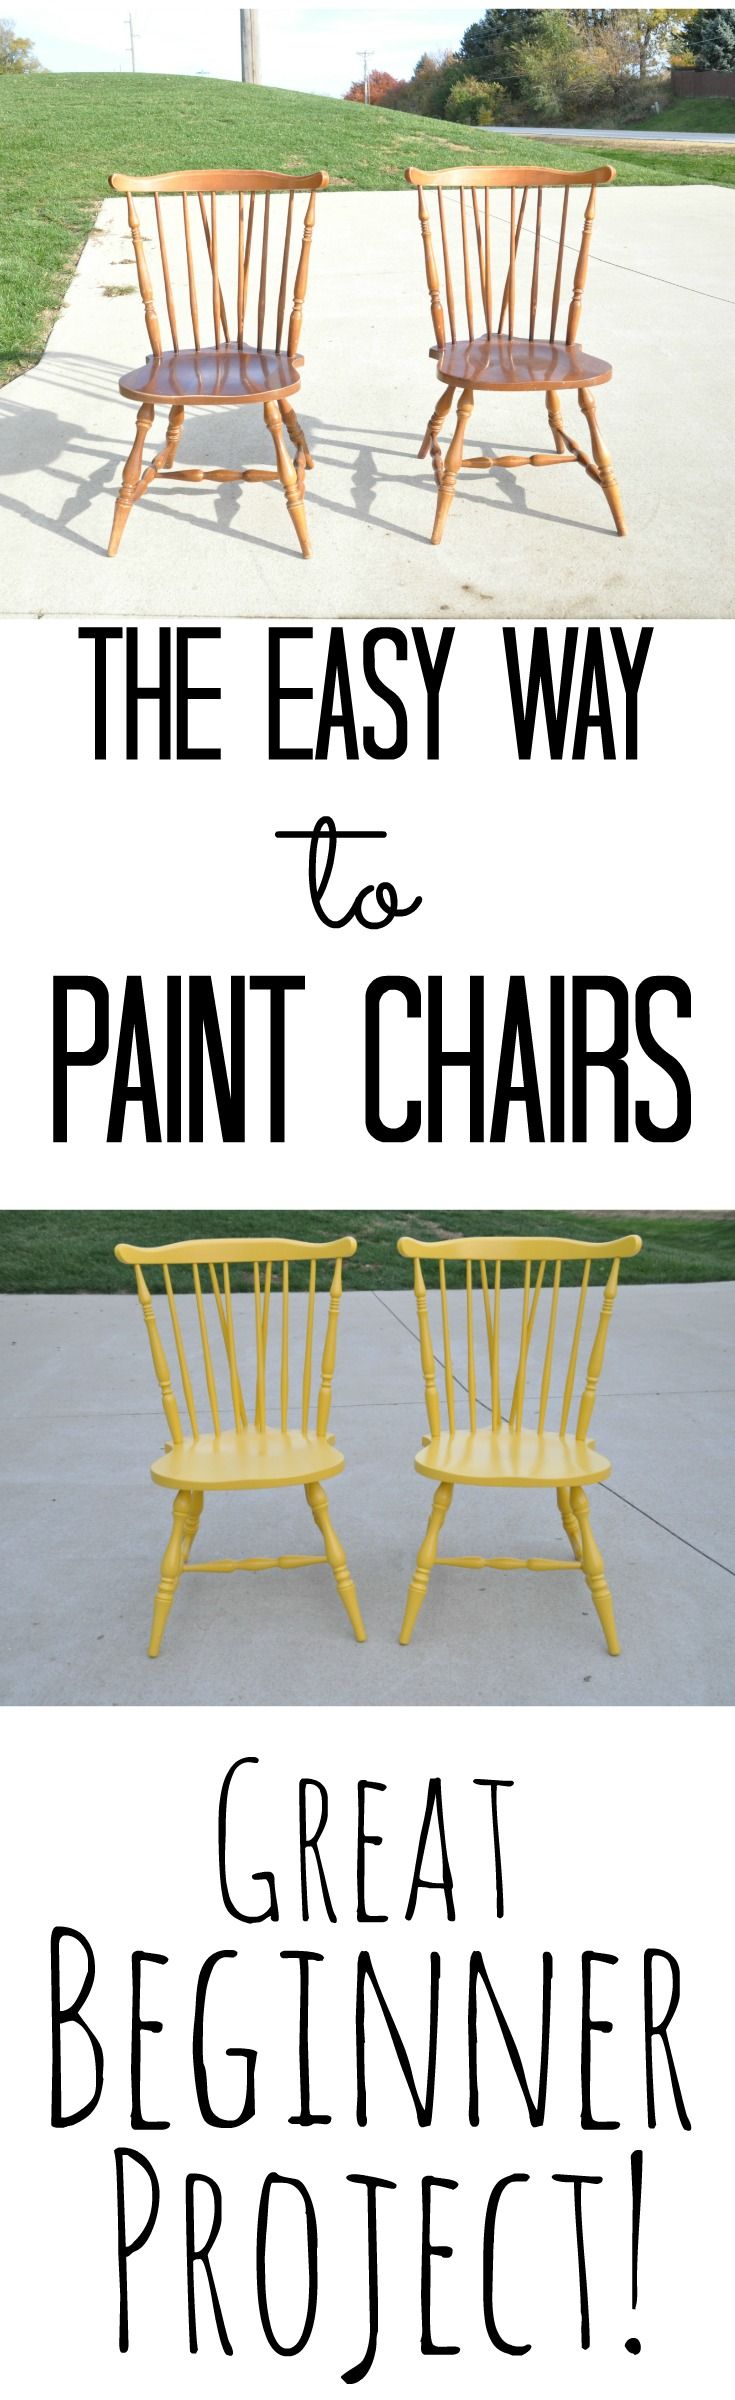 How to Paint Chairs the Easy Way